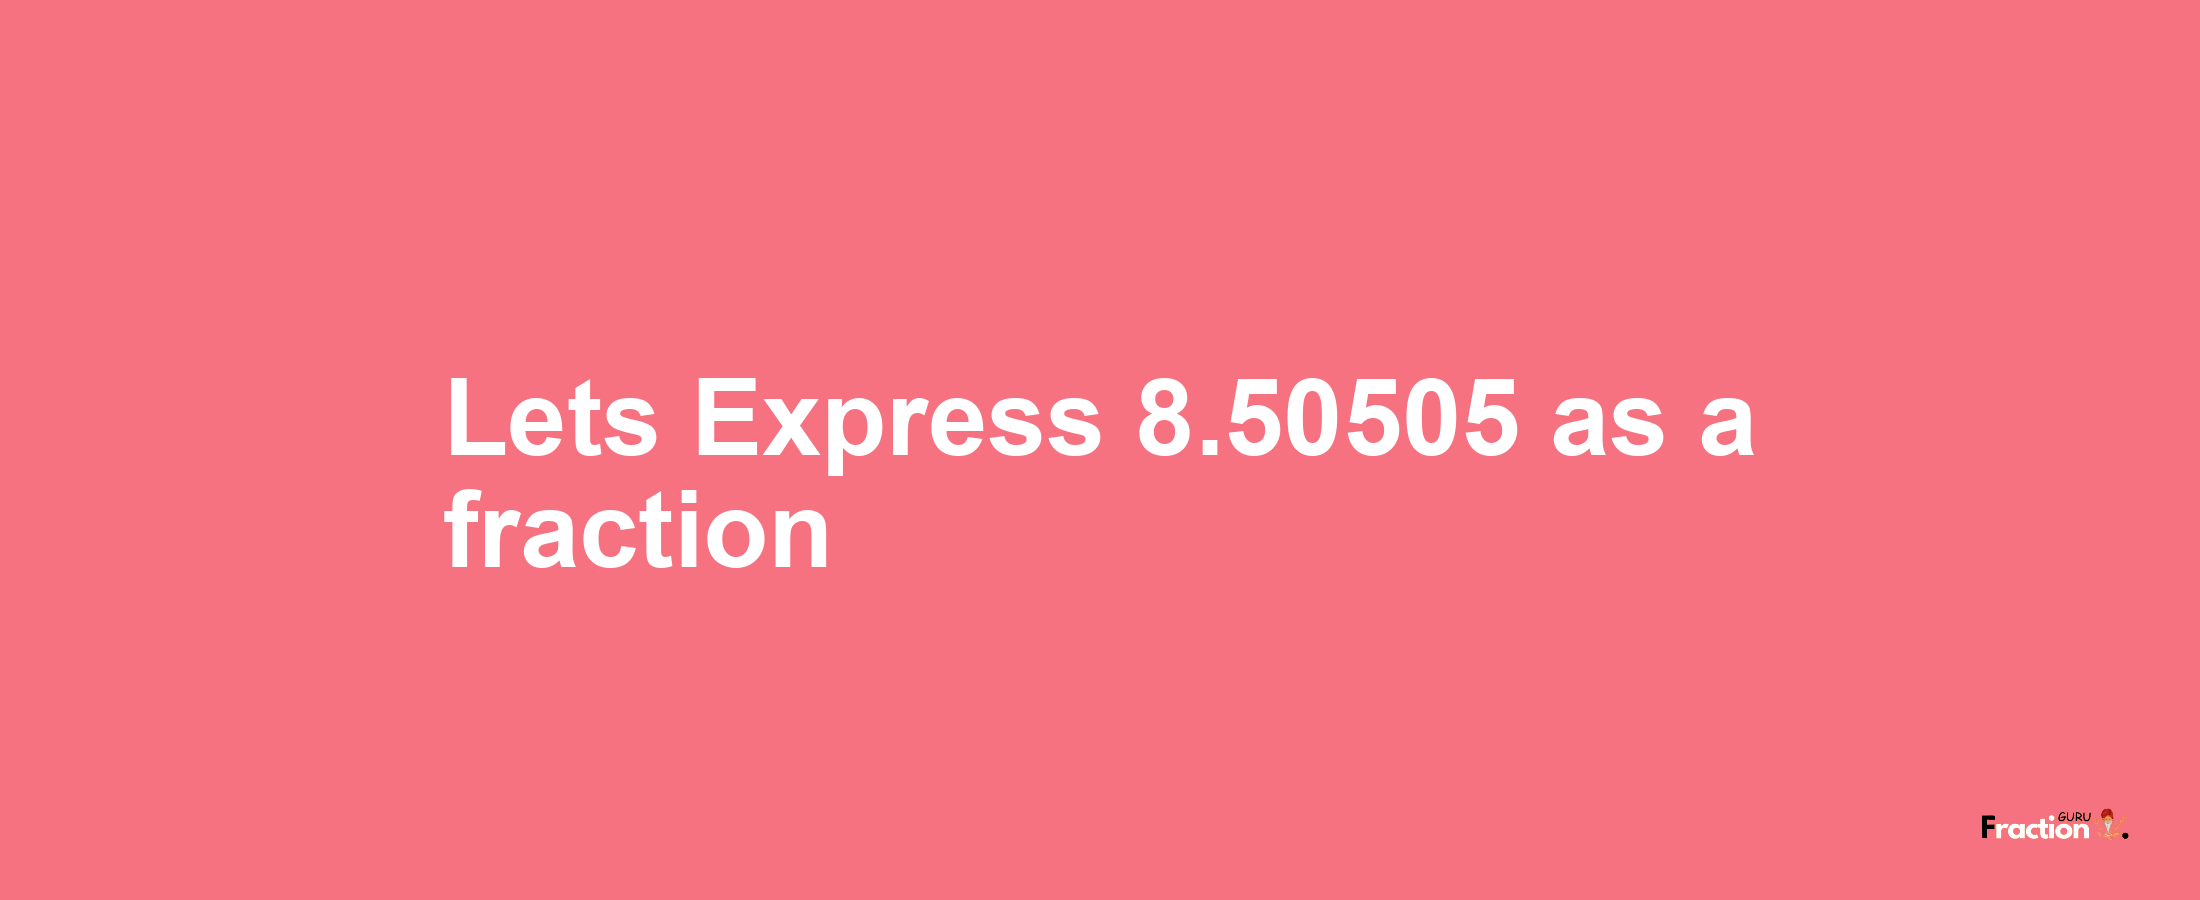 Lets Express 8.50505 as afraction